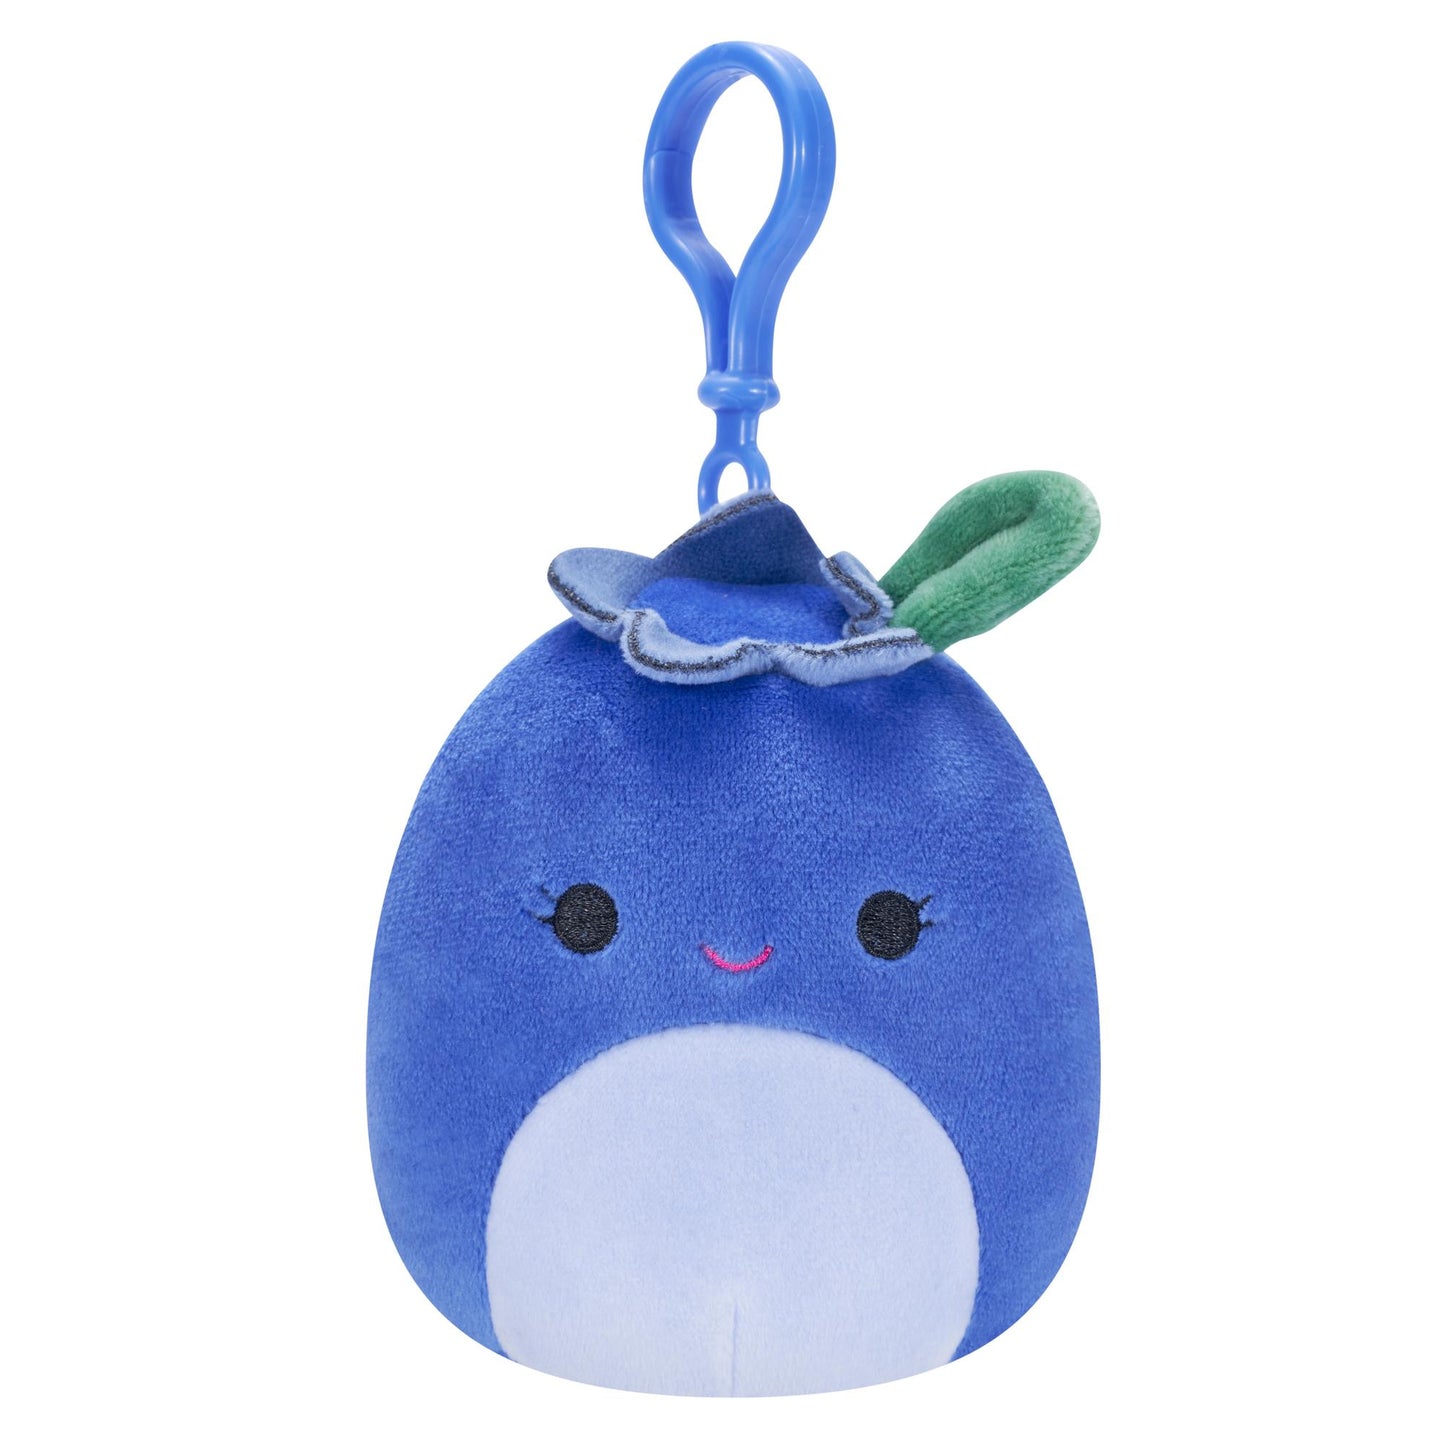 SQUISHMALLOWS CLIP-ON BLUBY THE BLUEBERRY 9 CM-Squishmallow-SweMallow